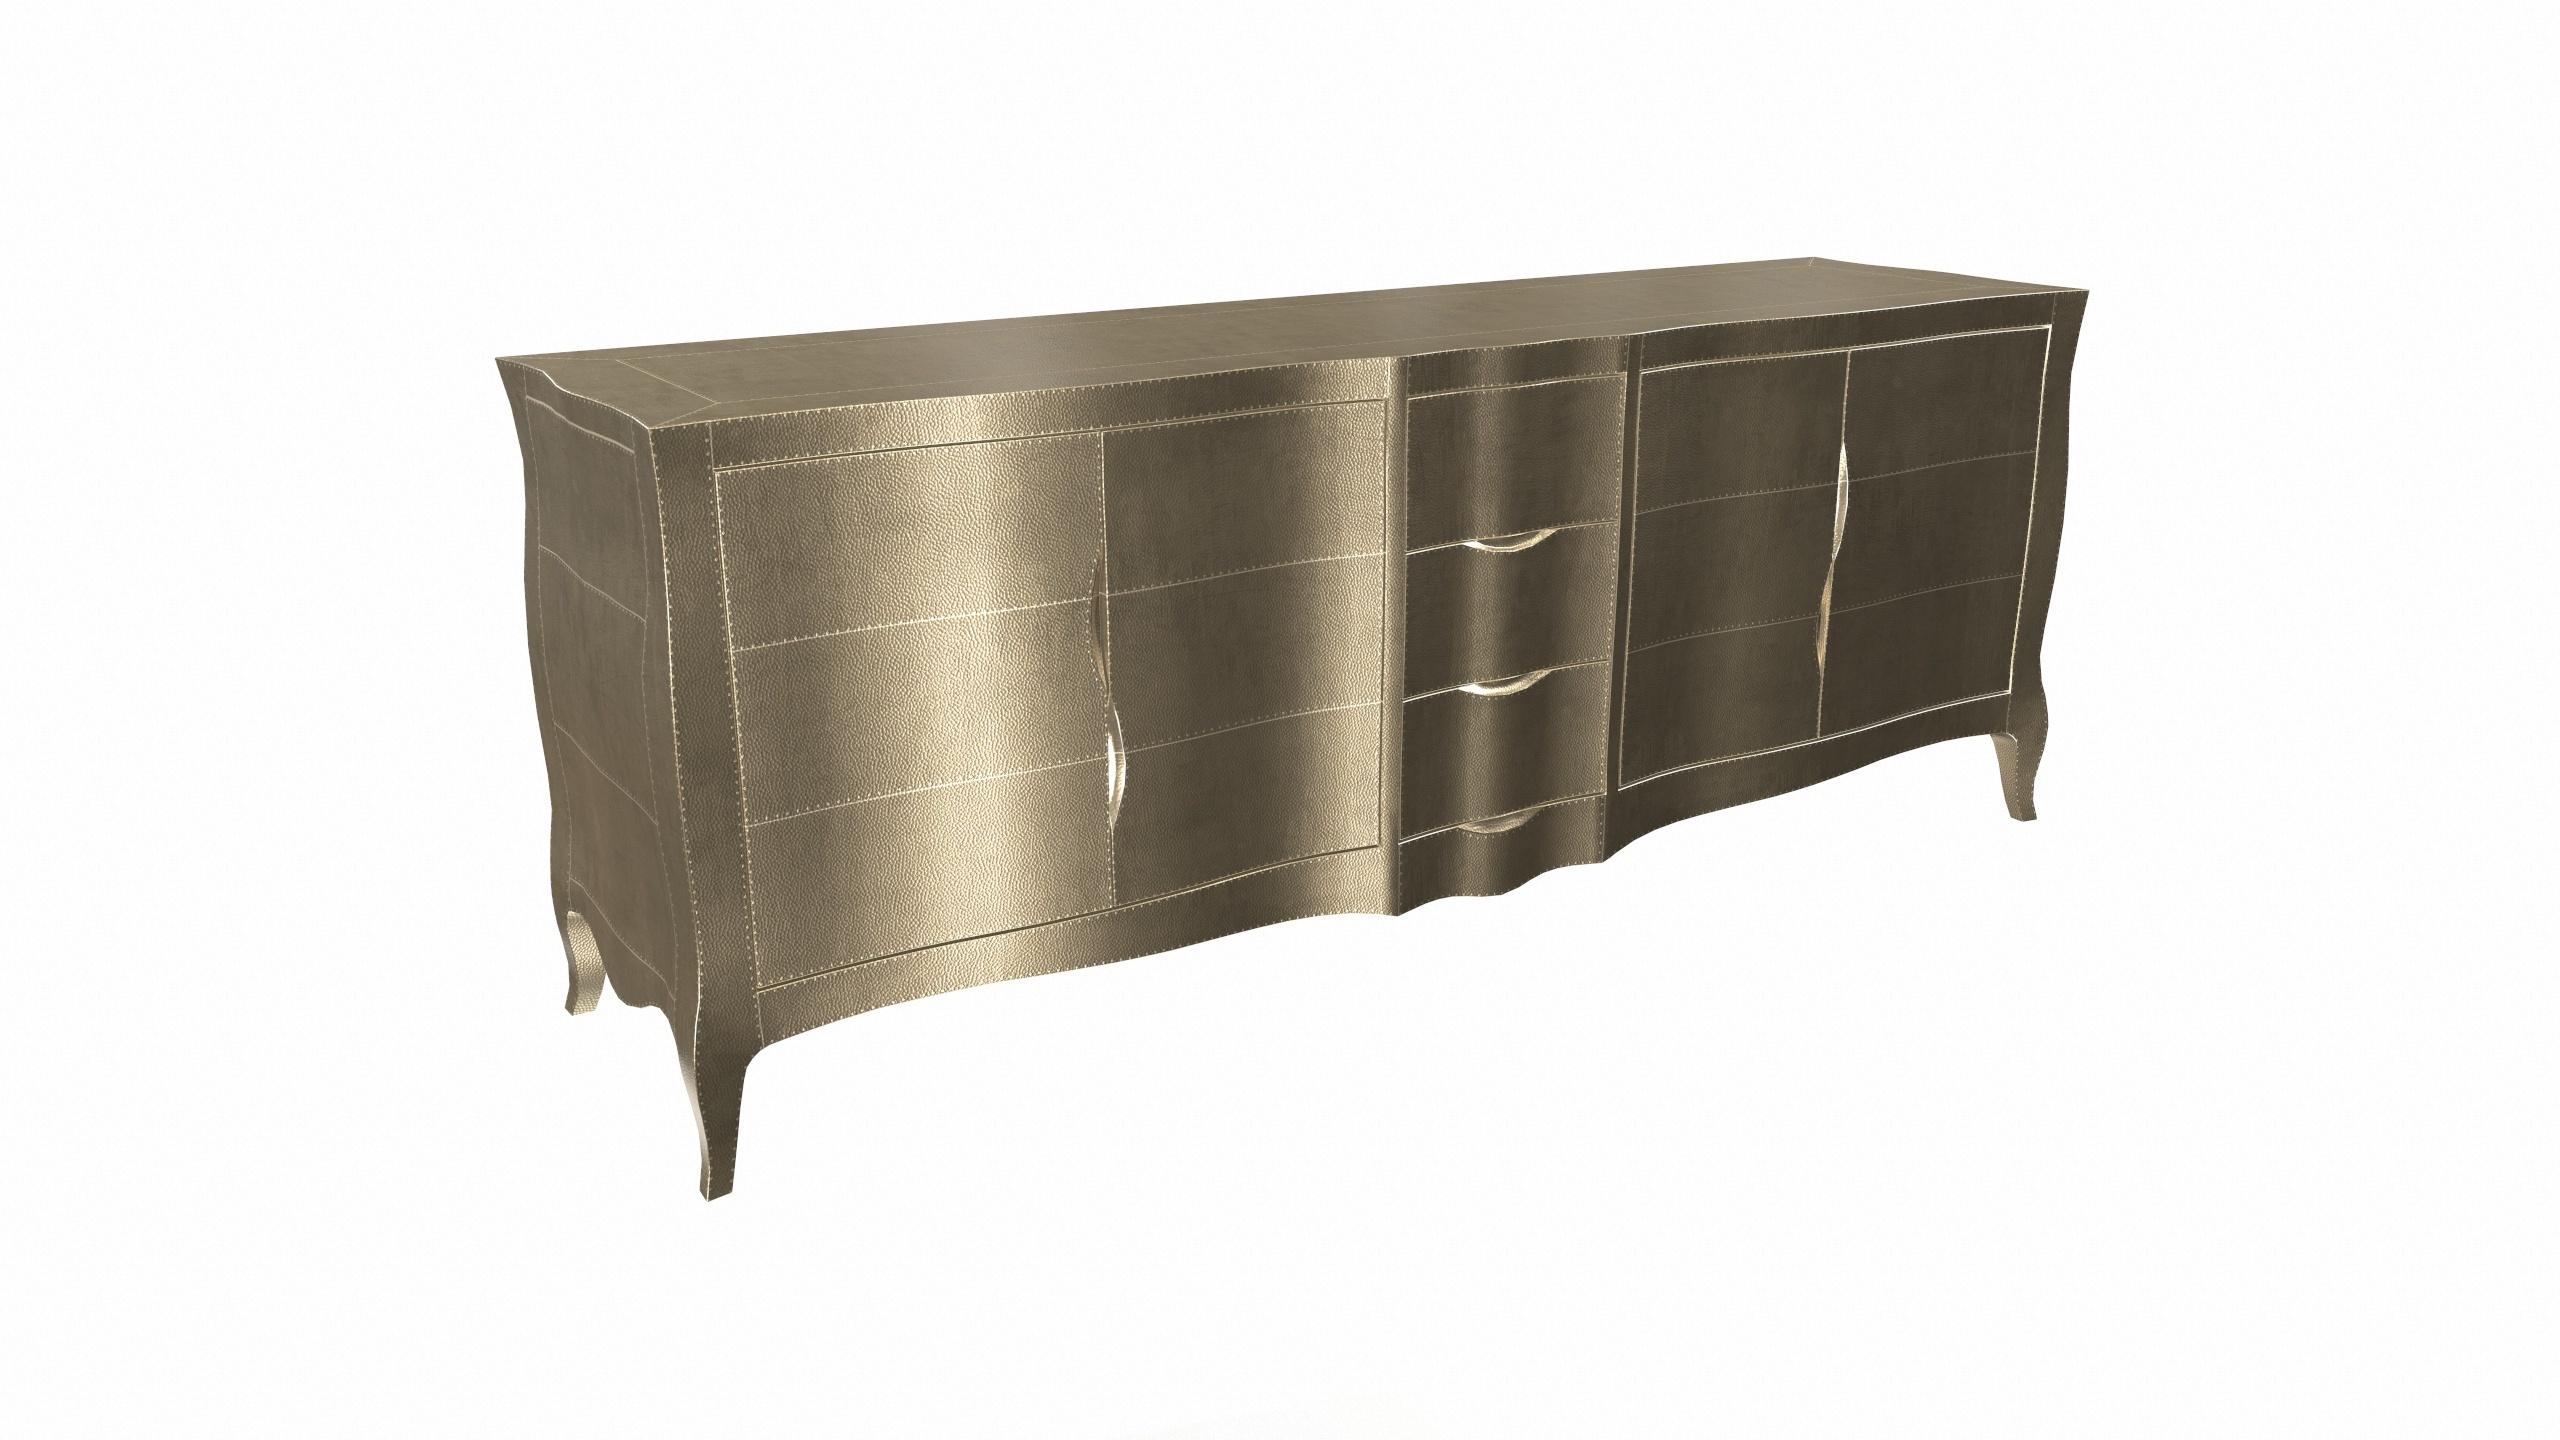 Contemporary Louise Credenza Art Deco Sideboards in Mid. Hammered Brass by Paul Mathieu For Sale